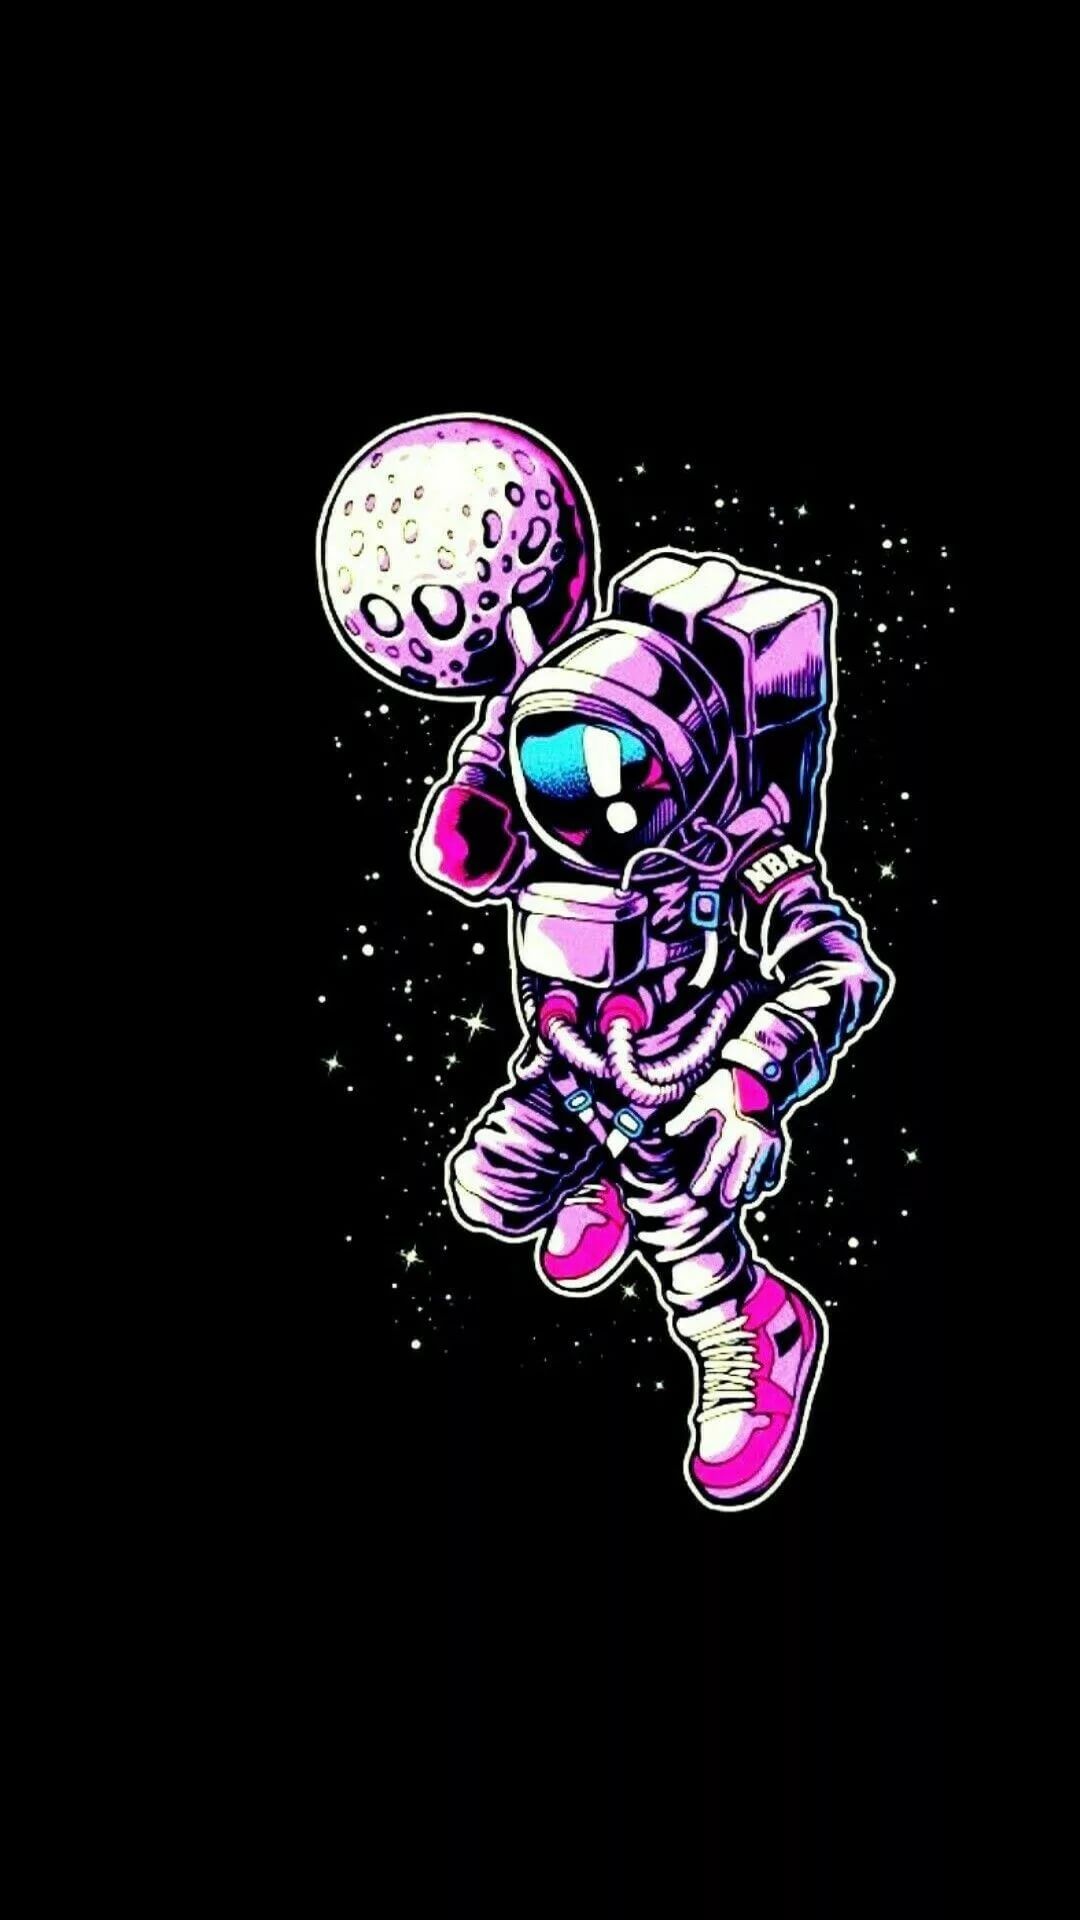 Emo Picture Apple Wallpaper Hd - Astronaut Playing Basketball With Moon - HD Wallpaper 